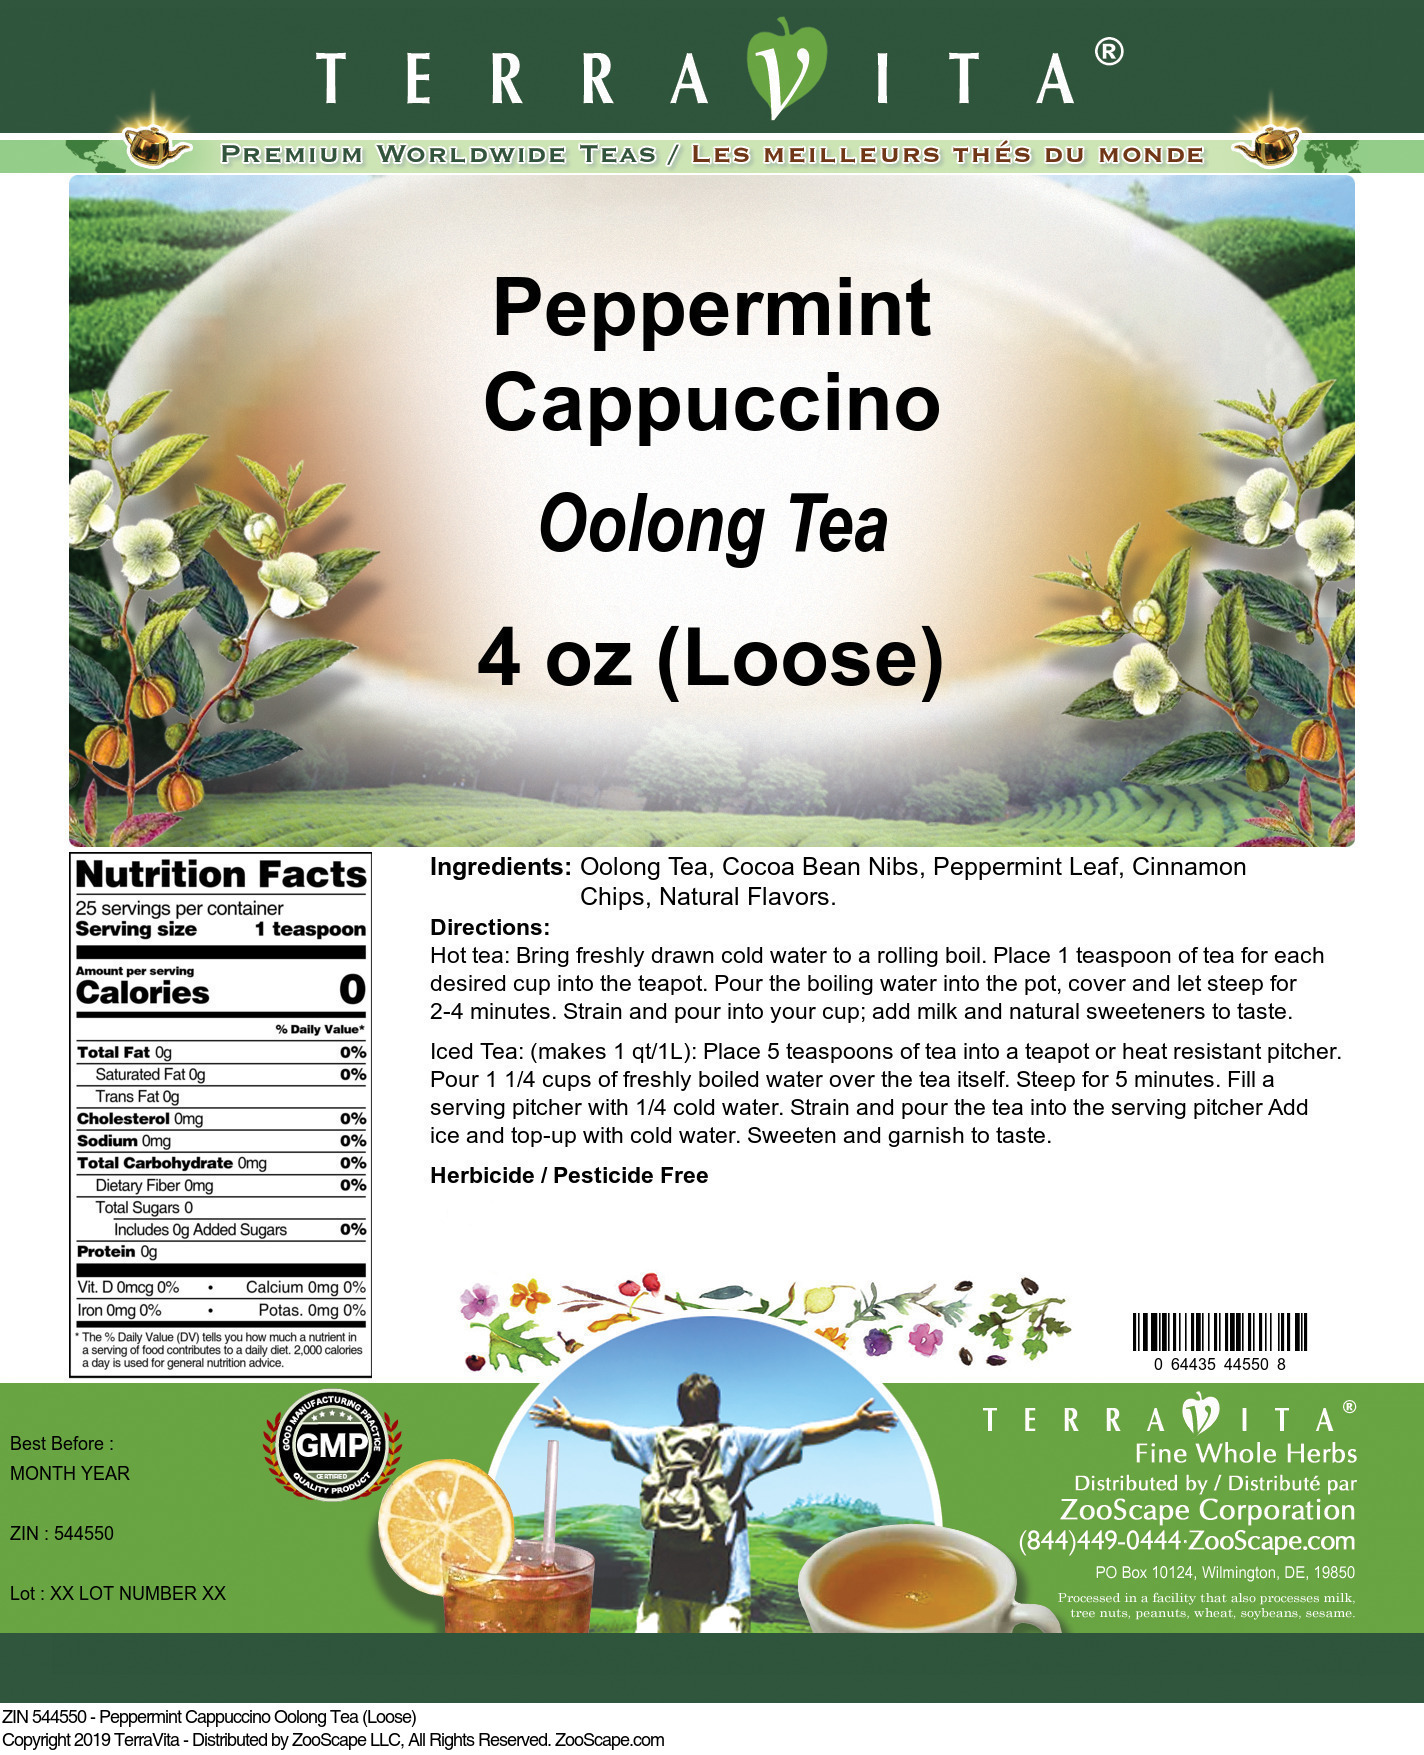 Peppermint Cappuccino Oolong Tea (Loose) - Label